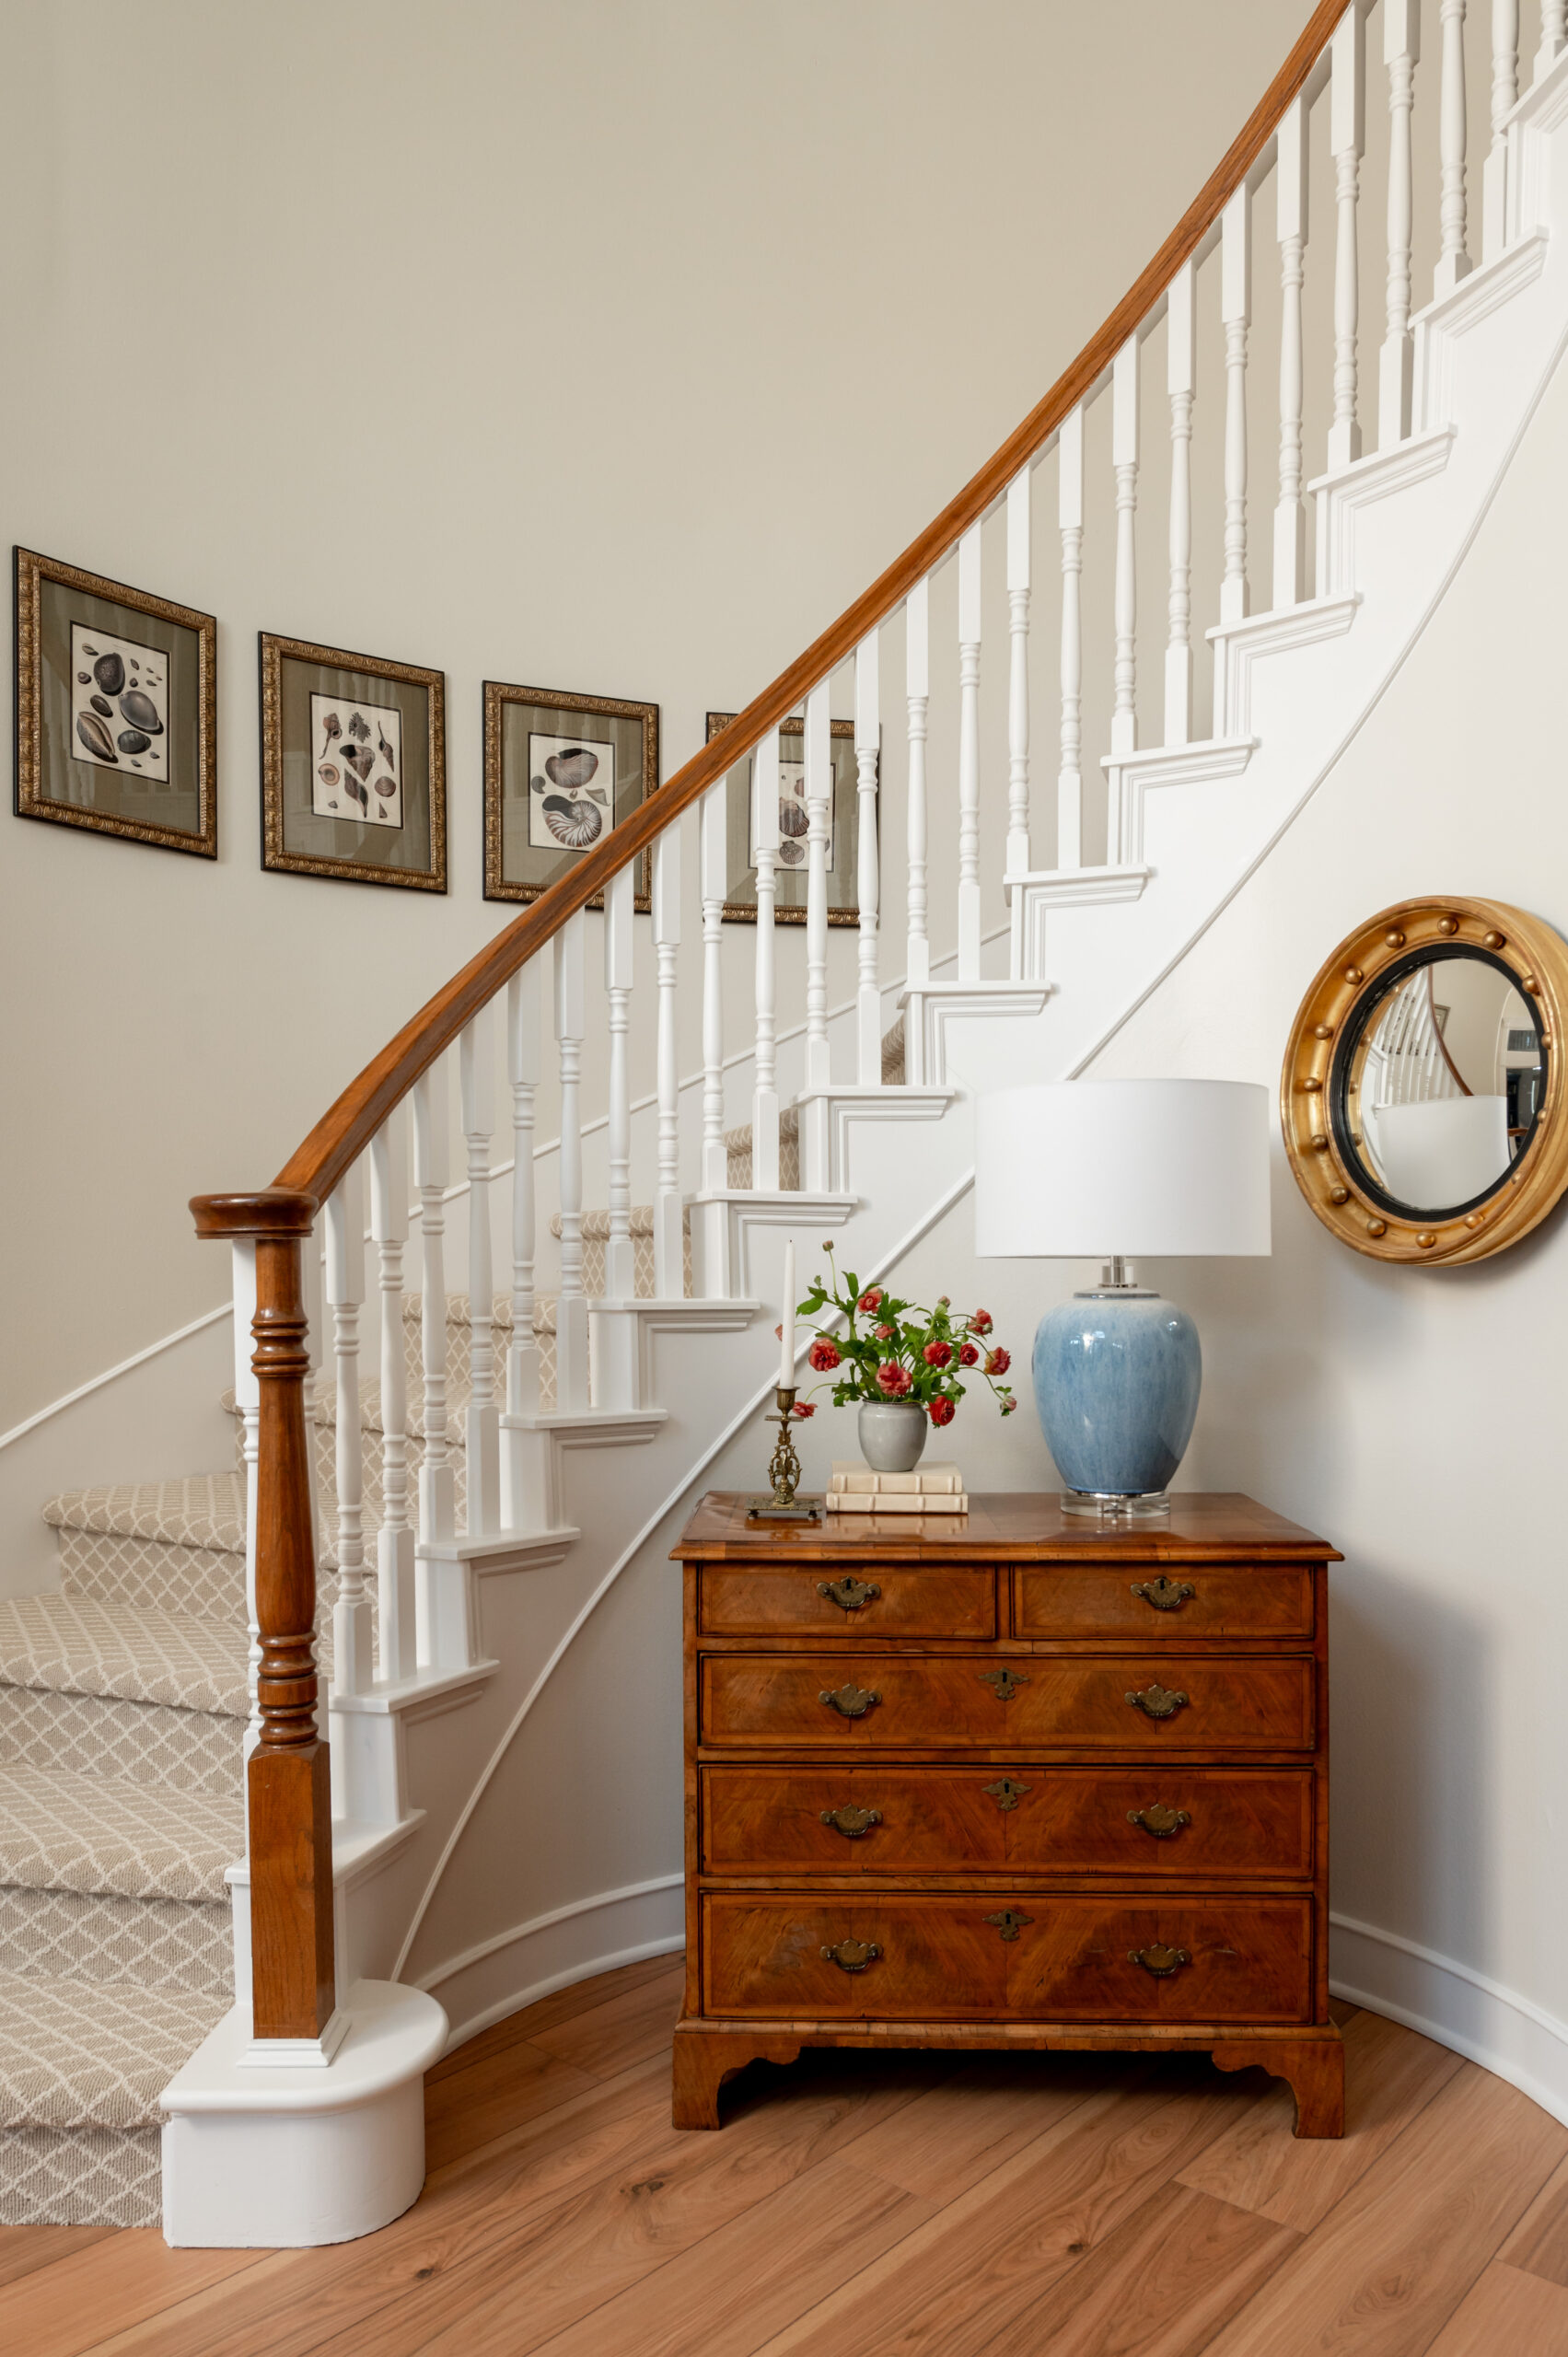 Stunning entryway with wooden dresser and spiral stairs